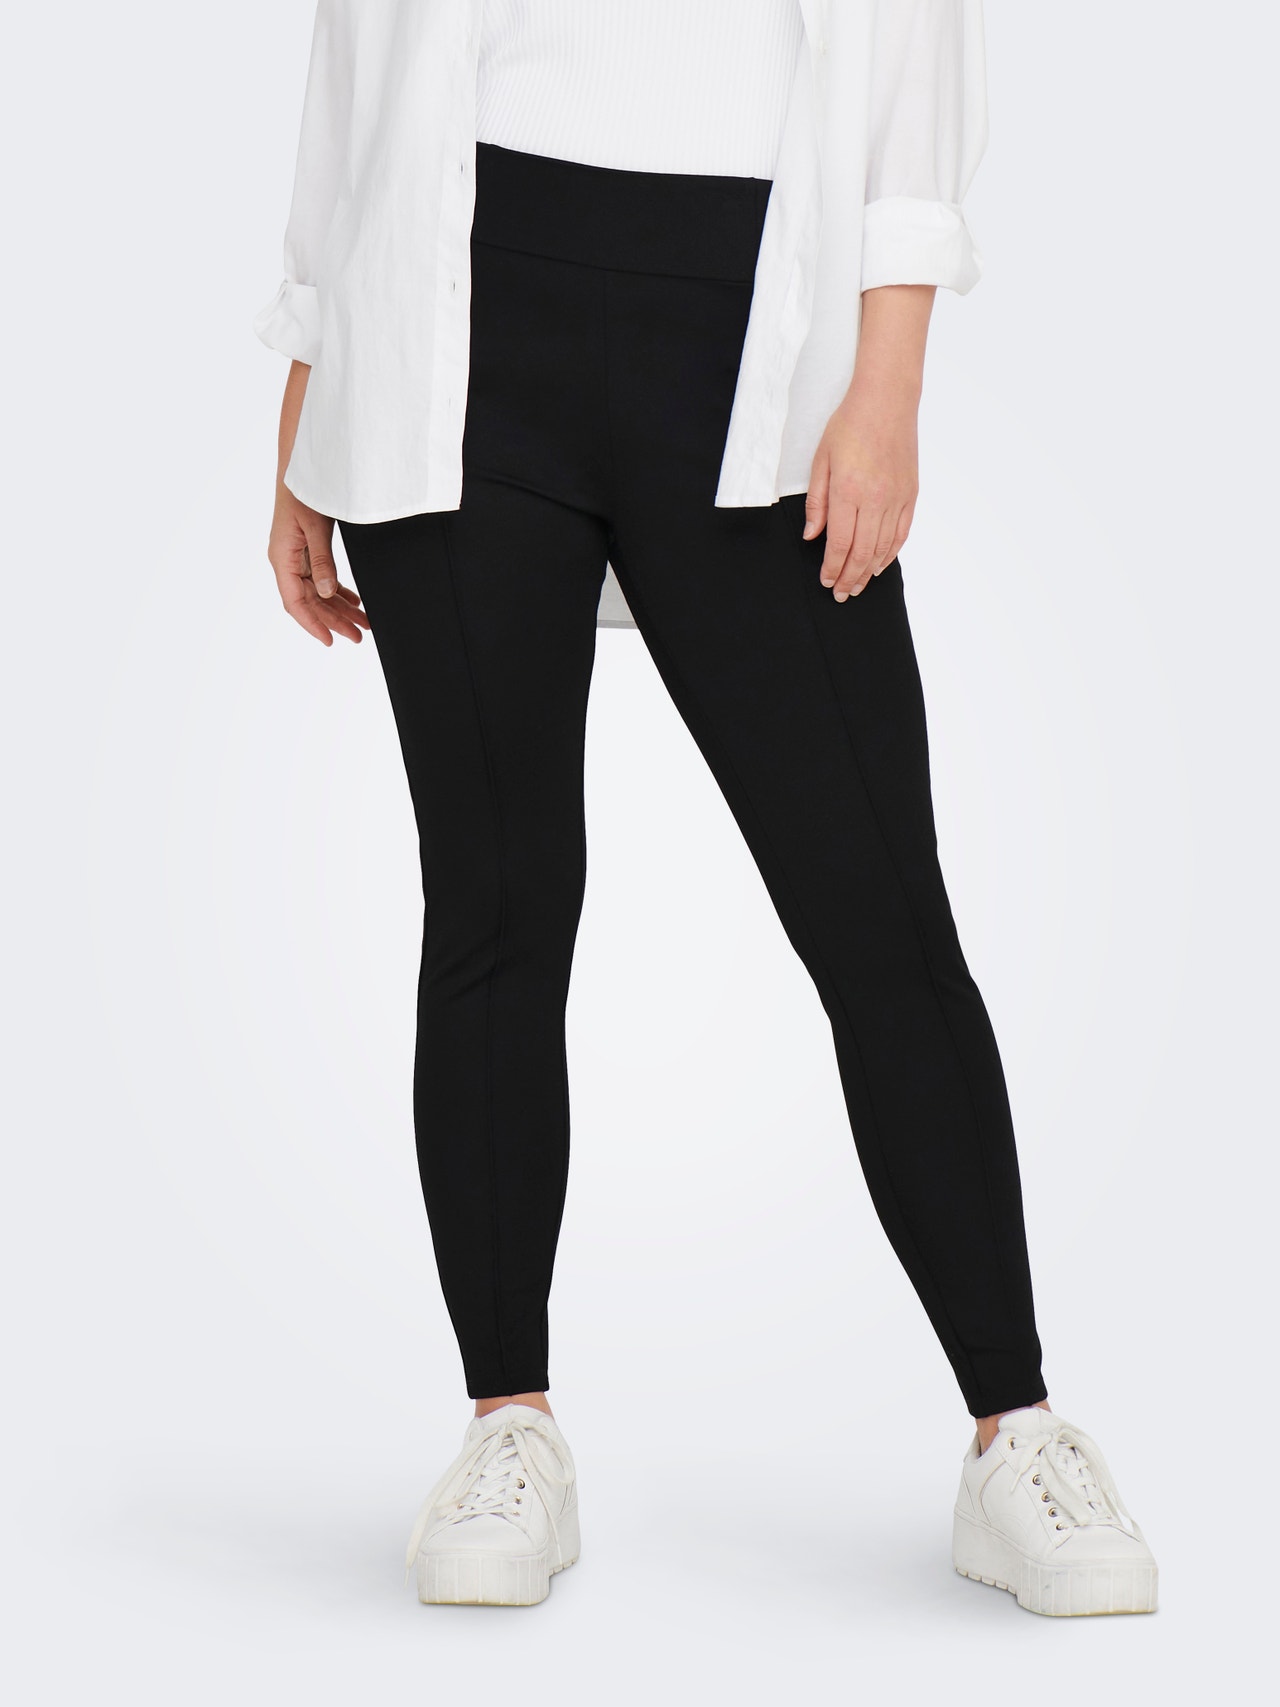 ONLY Skinny Fit Hohe Taille Leggings -Black - 15242198